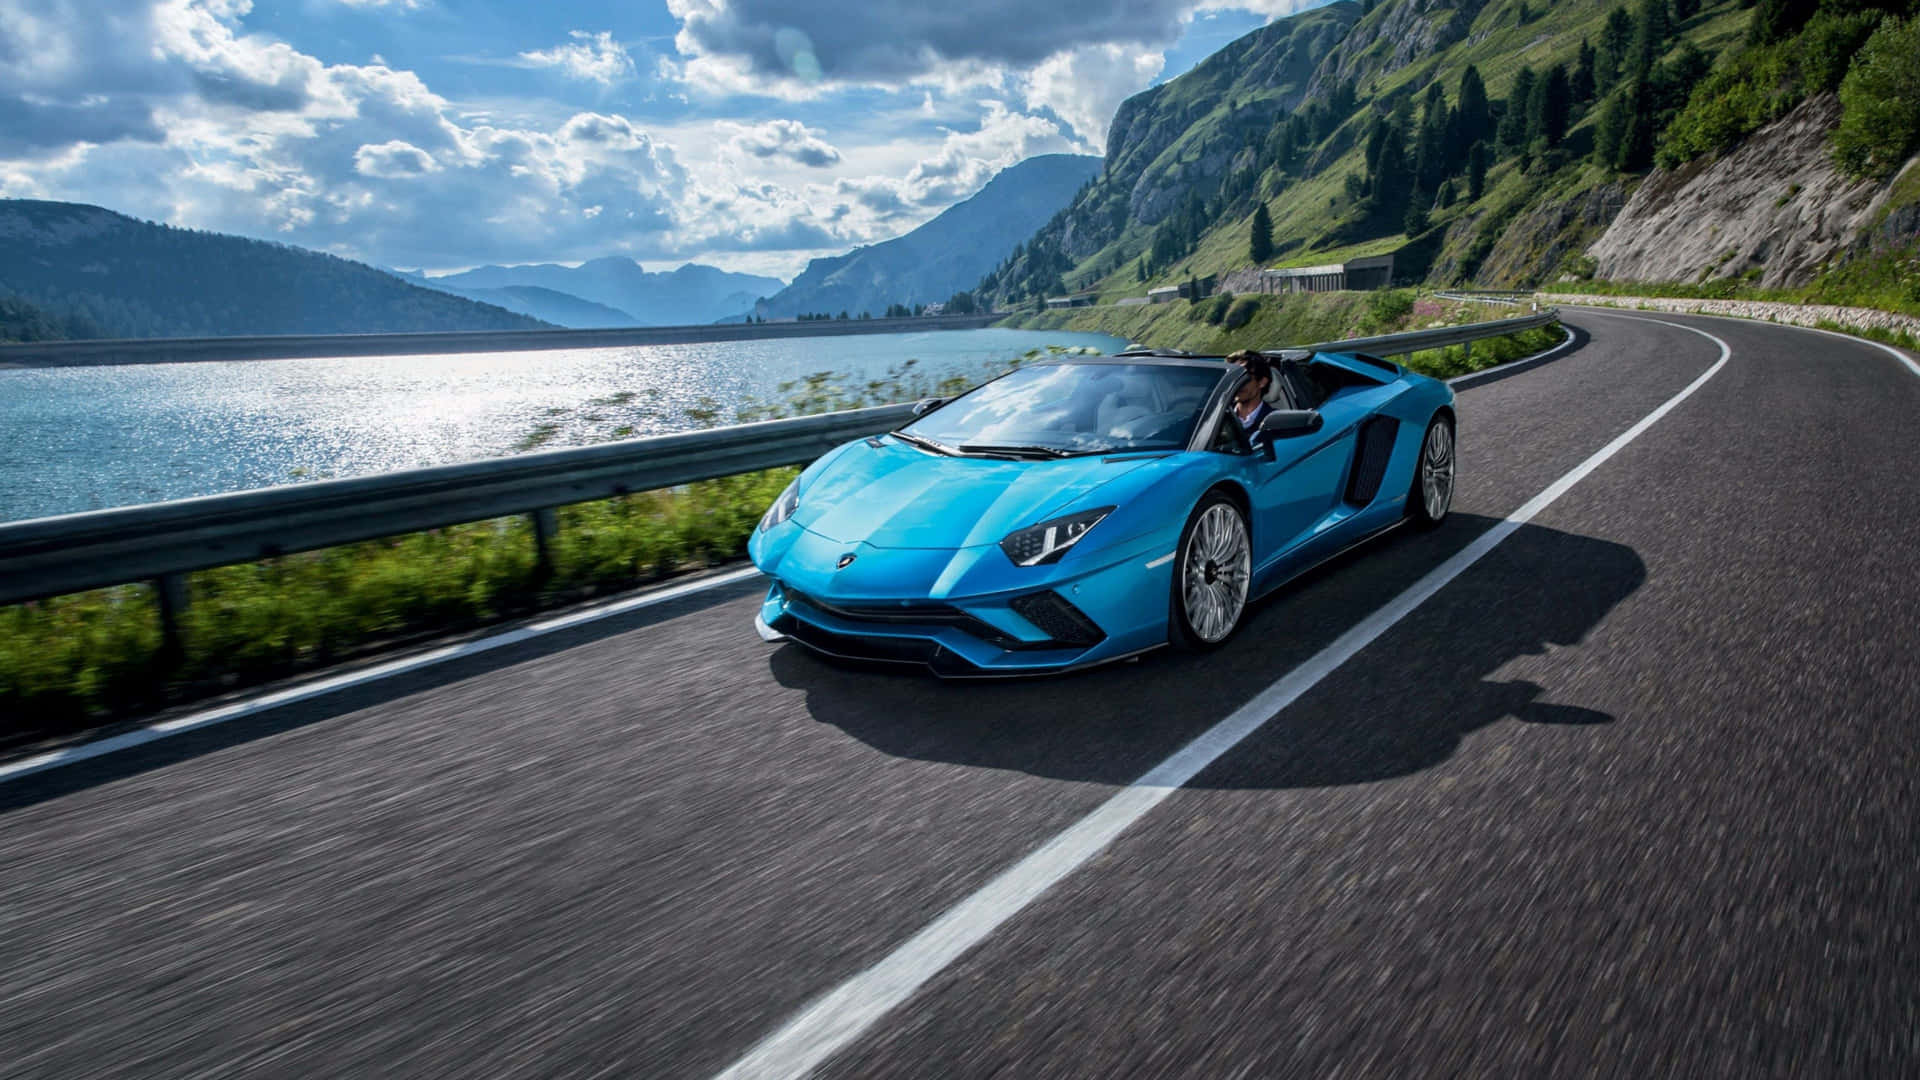 A luxurious Lamborghini shines brightly in 4K resolution.